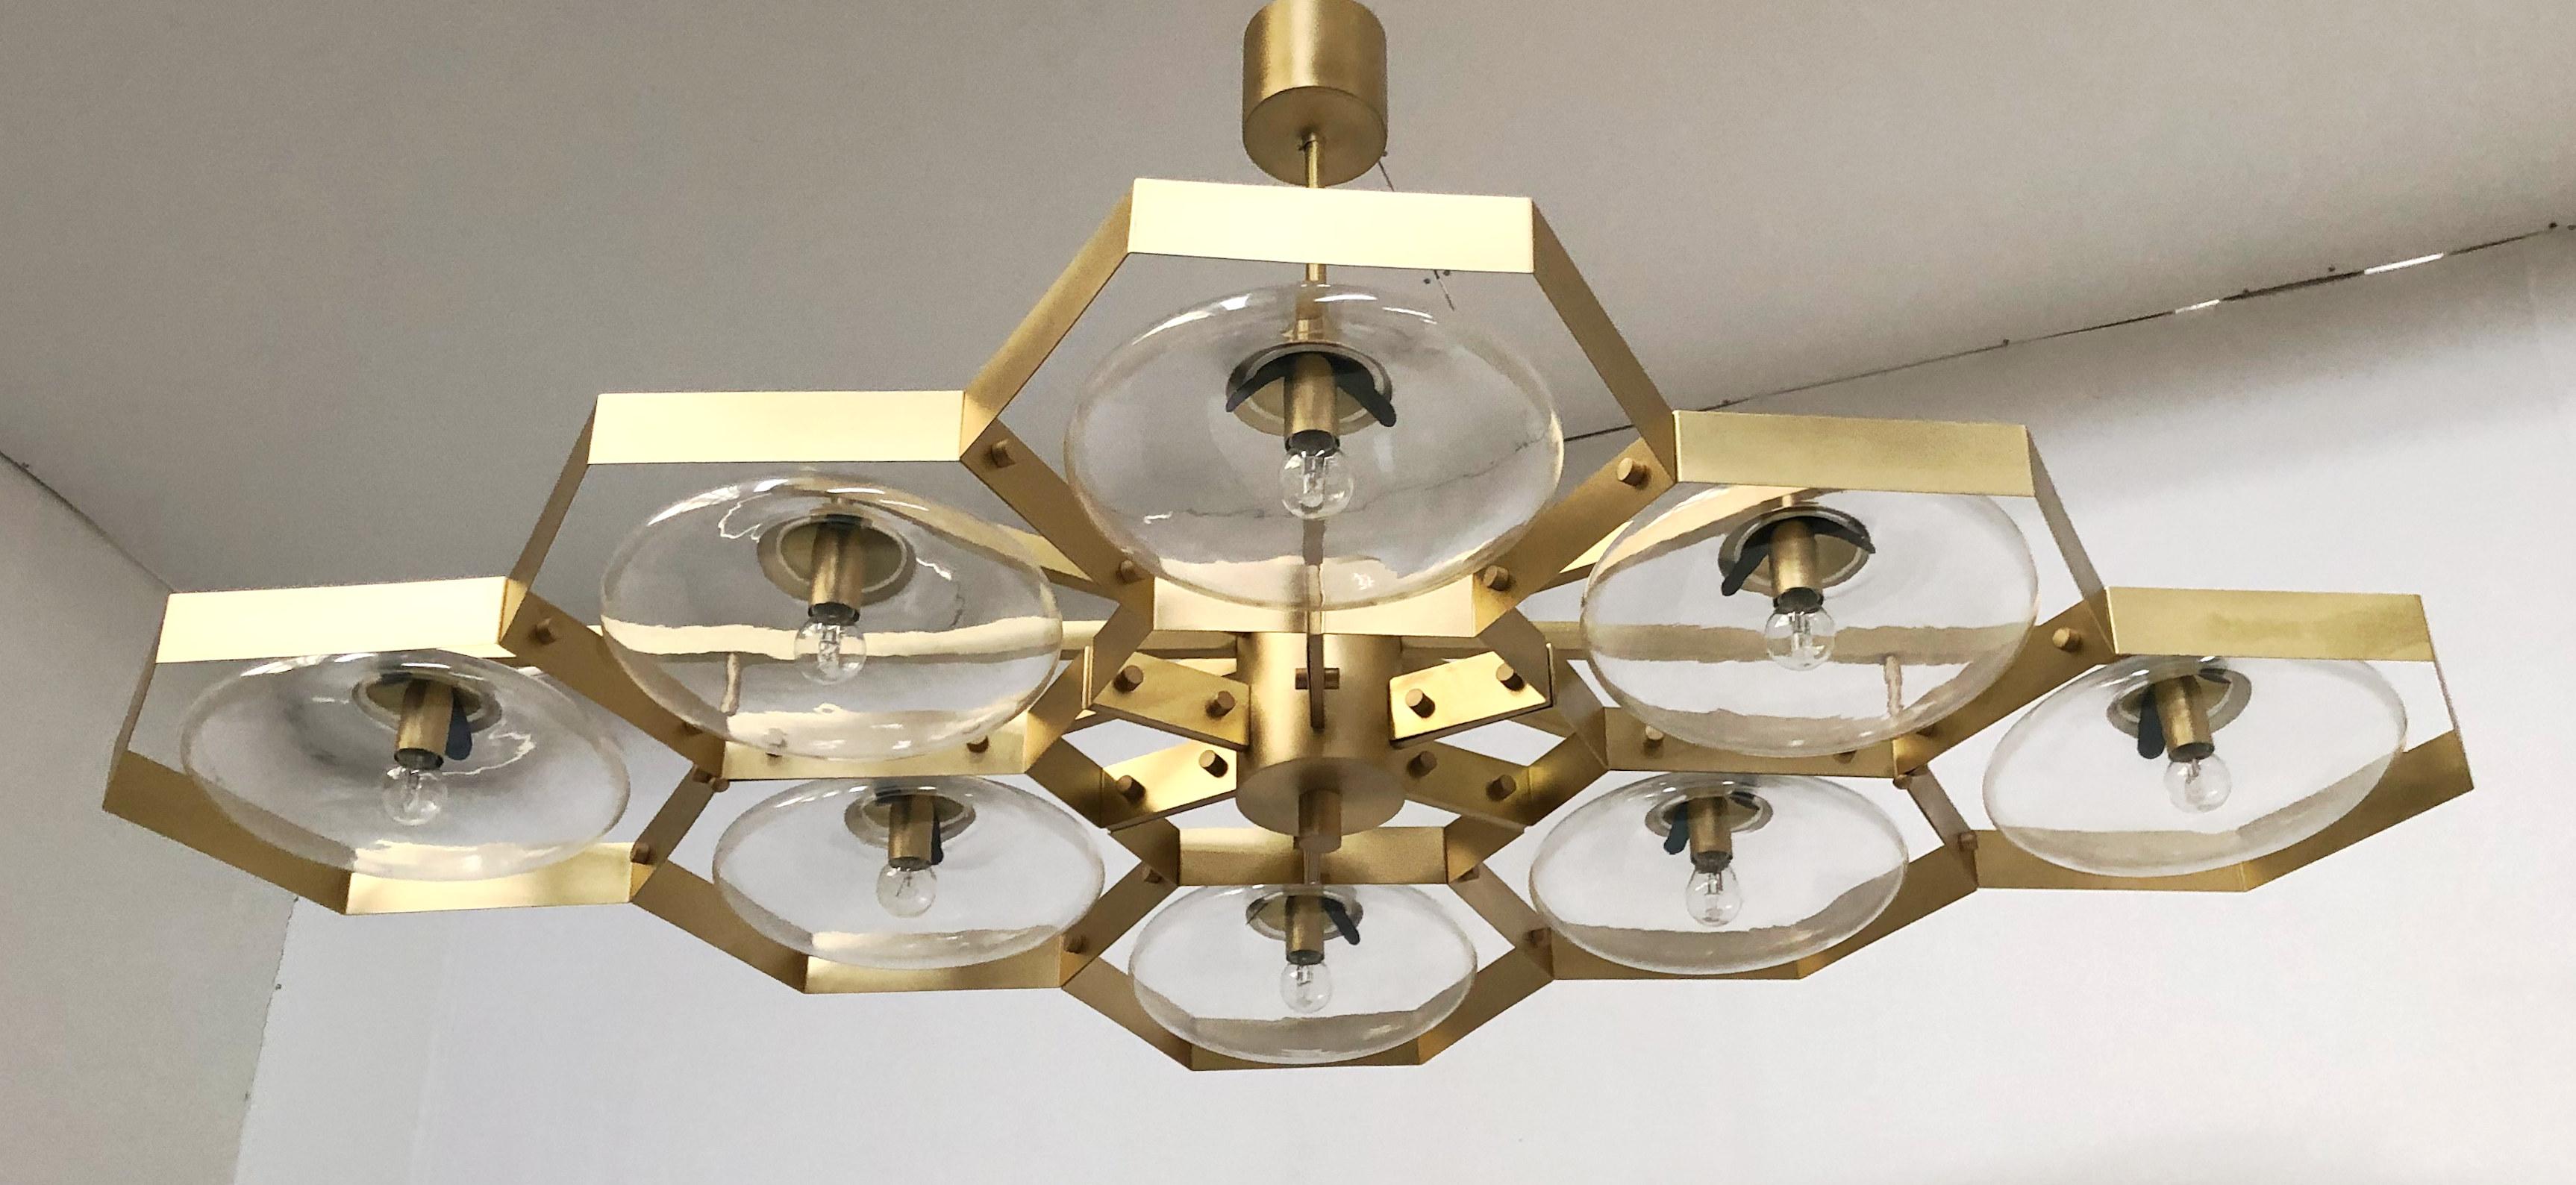 Italian chandelier with Murano glass shades mounted on solid brass frame / Made in Italy
Designed by Fabio Ltd, inspired by Angelo Lelli and Arredoluce styles
8 lights / E12 or E14 type / max 40W each
Length: 65 inches / Width: 42.5 inches / Height: